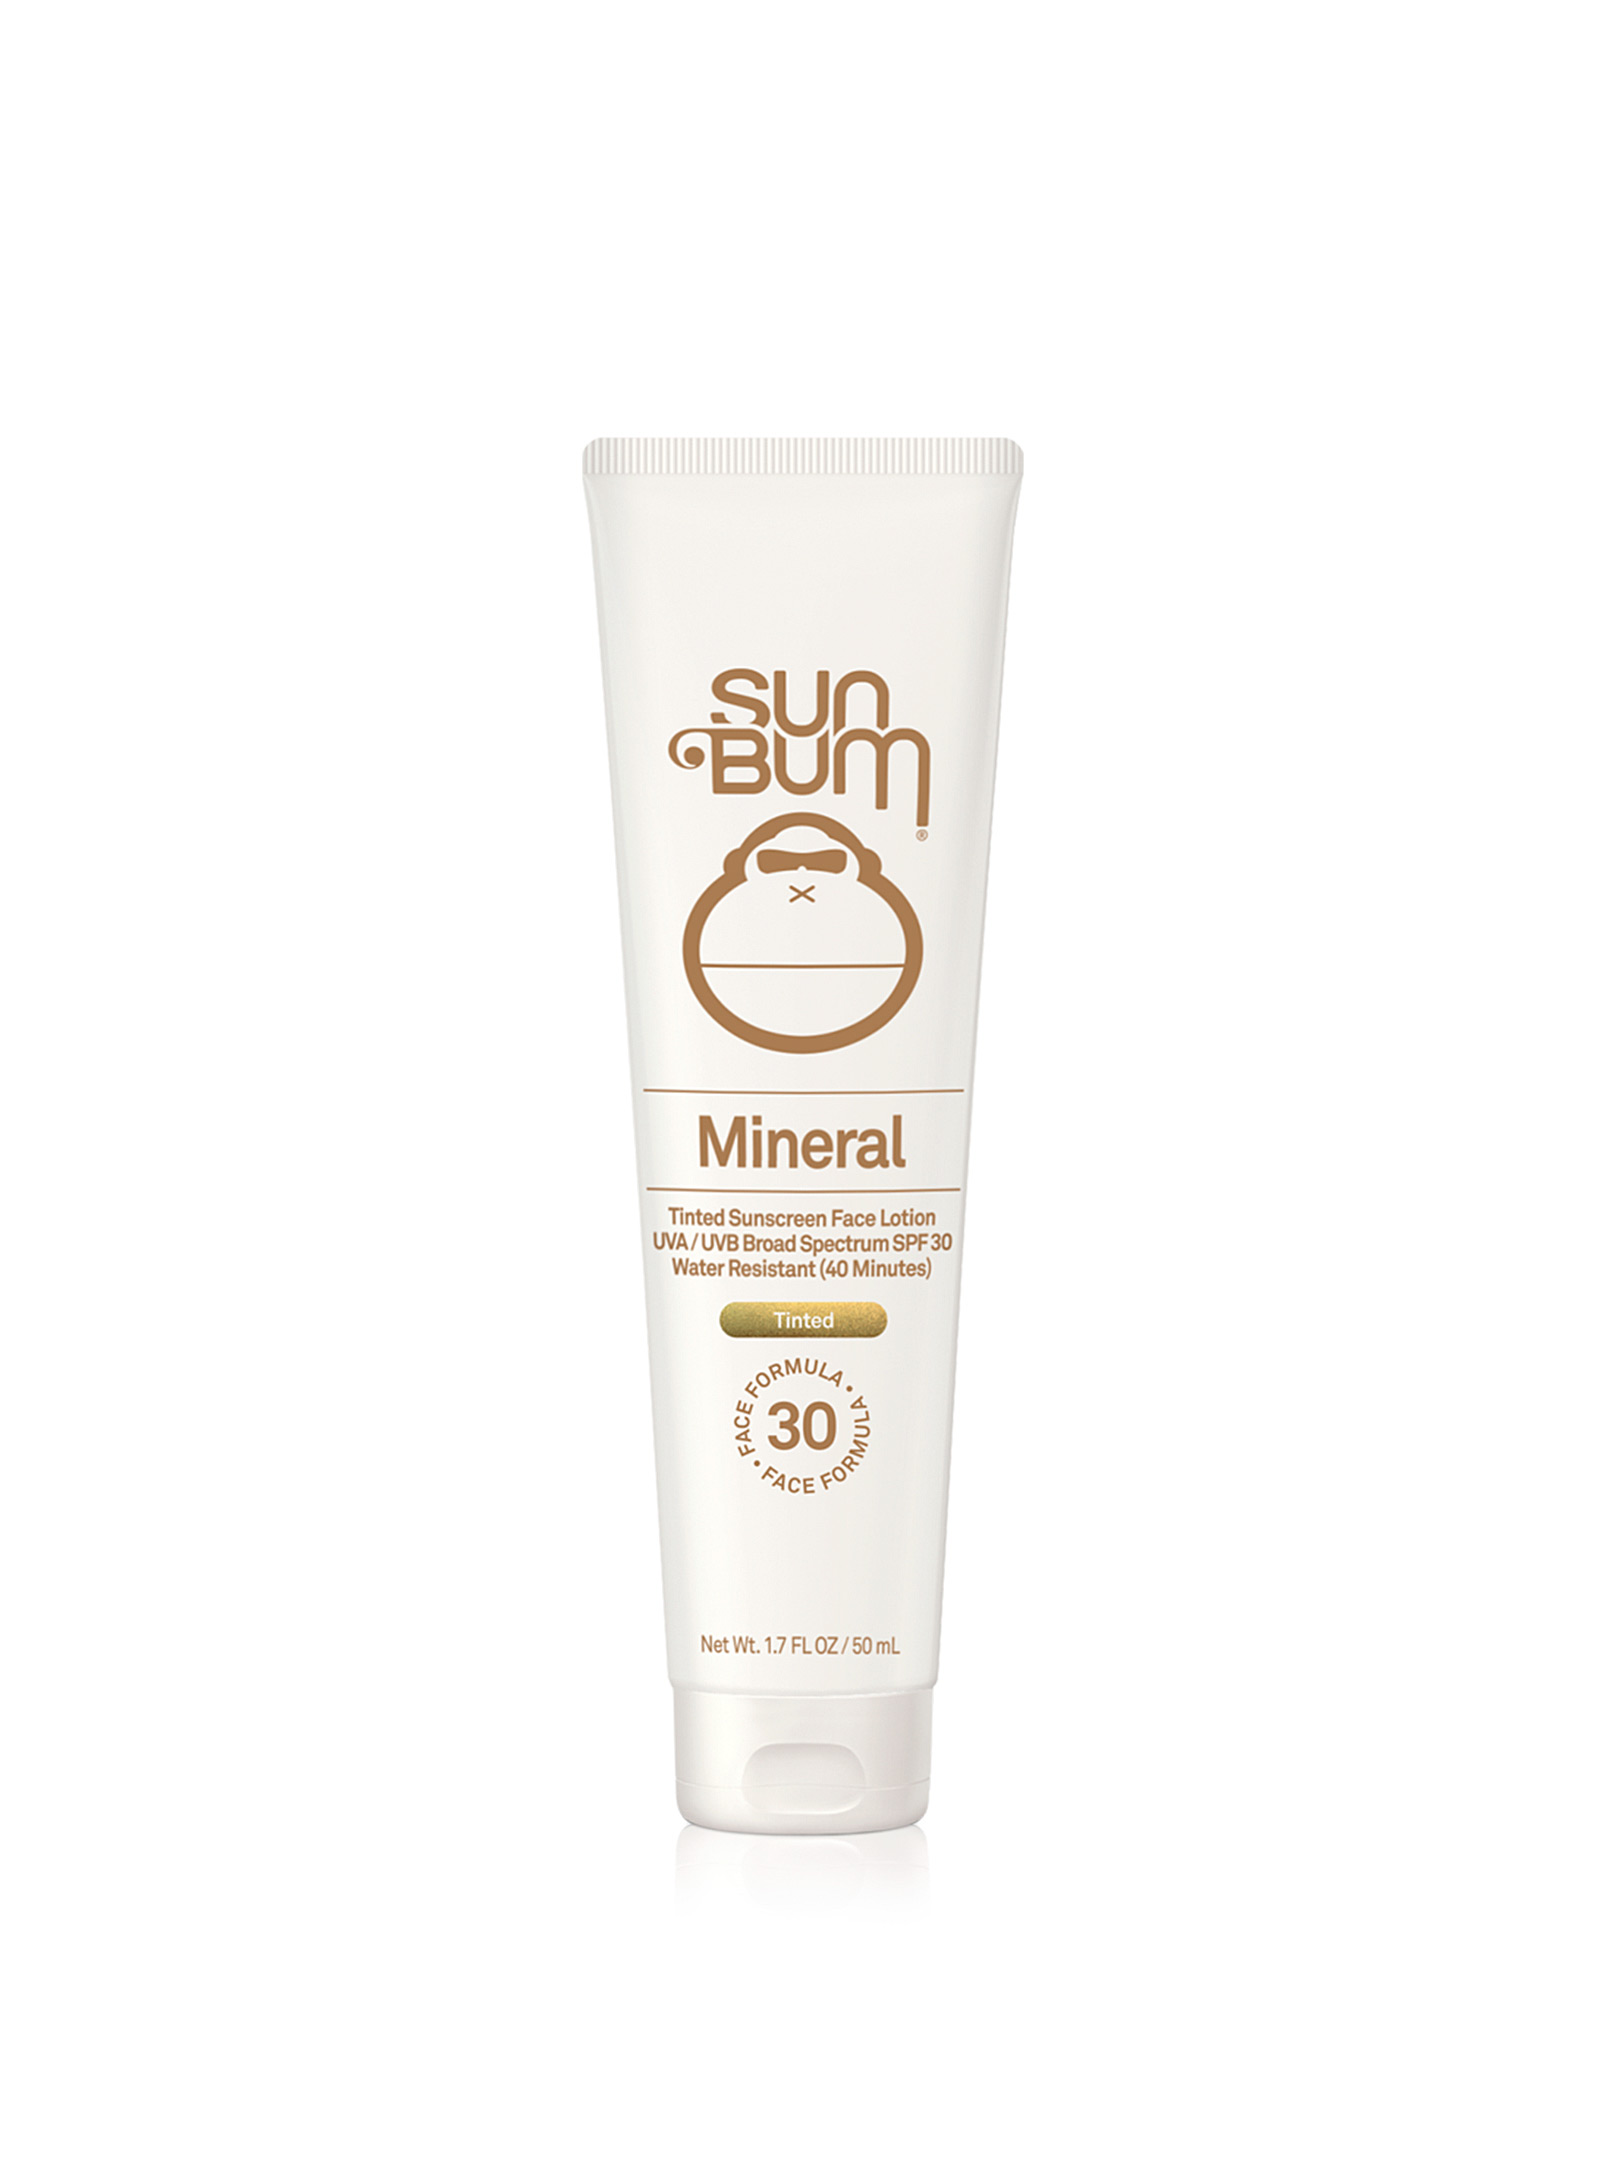 Sun Bum - Mineral SPF 30 tinted sunscreen face lotion